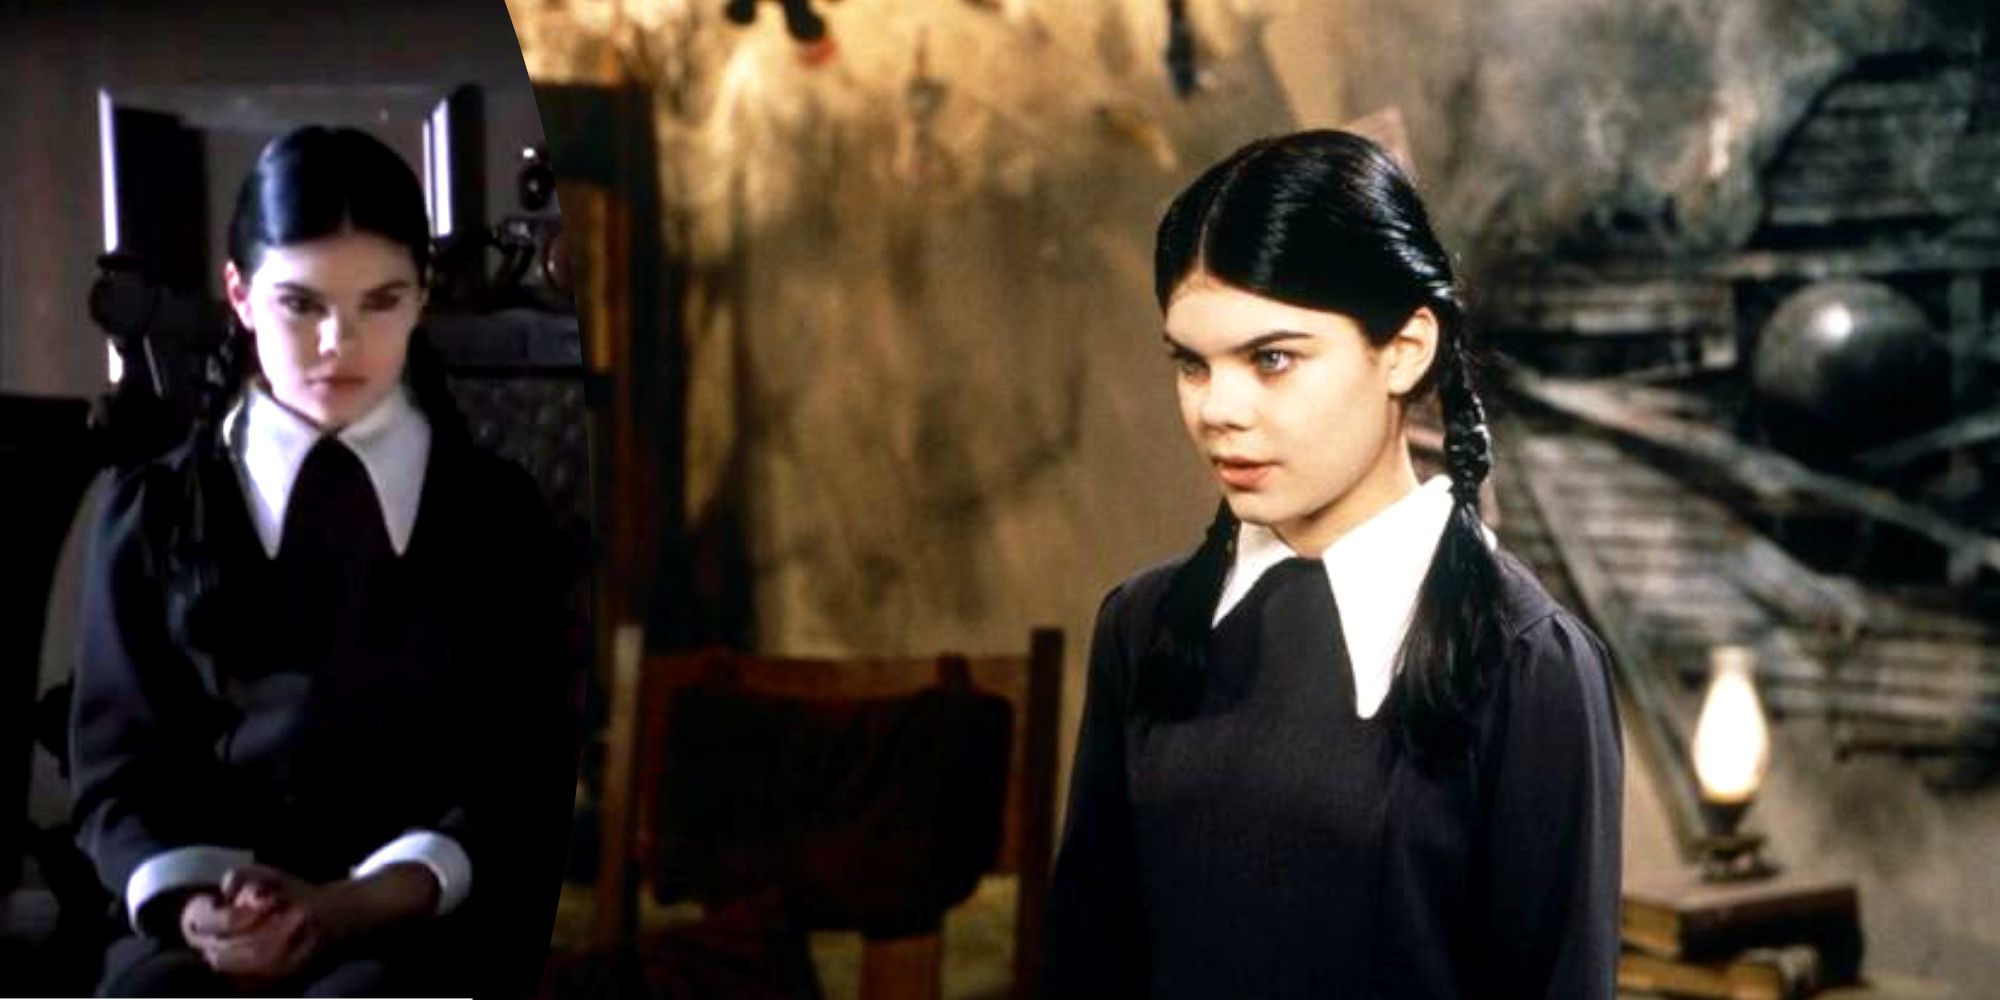 Wednesday The Addams Family Nicole Fugere (1998-1999) Addams Family Reunion and The New Addams Family